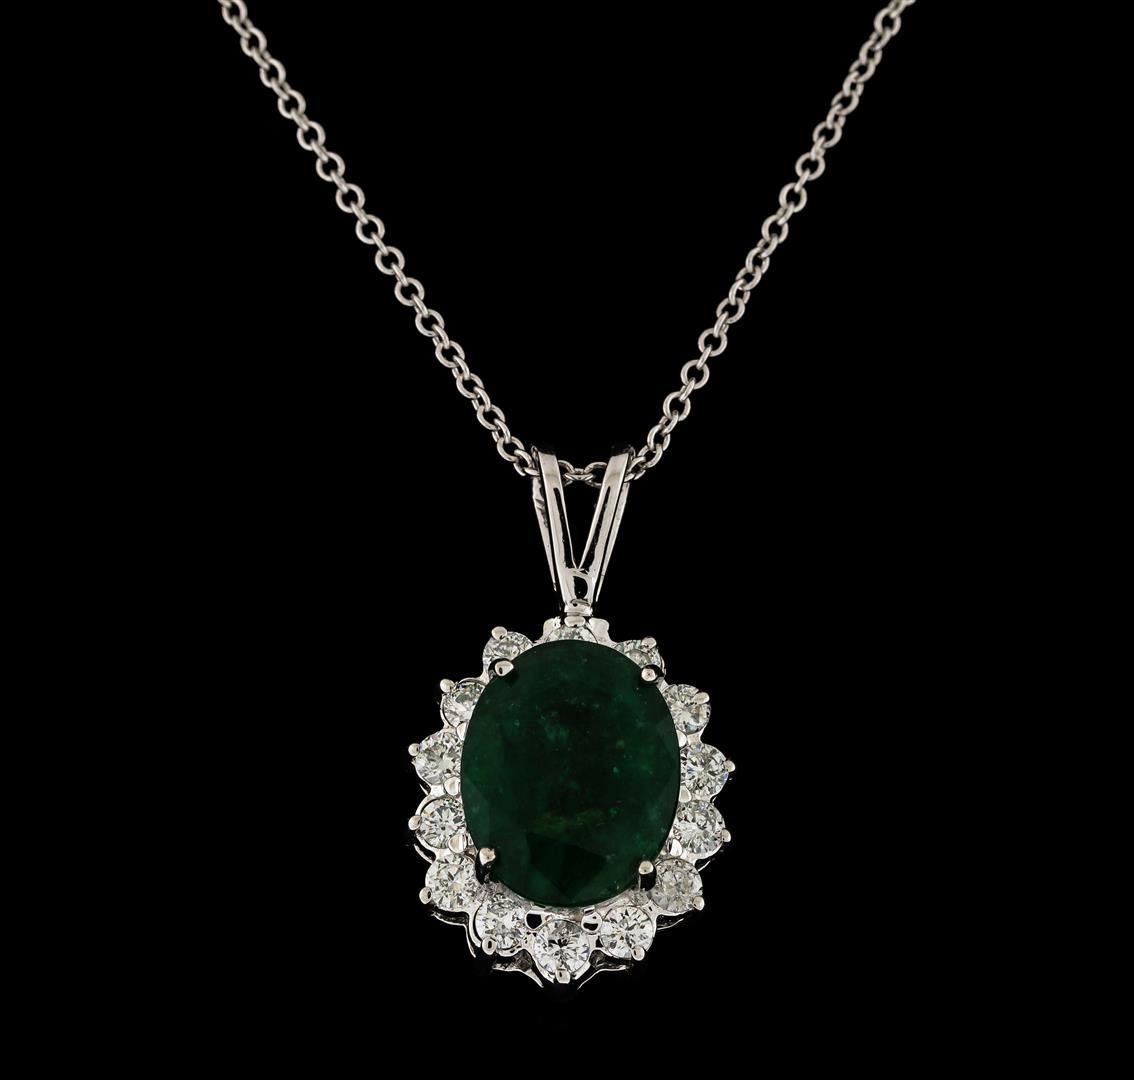 4.35 ctw Emerald and Diamond Pendant With Chain - 14KT White Gold